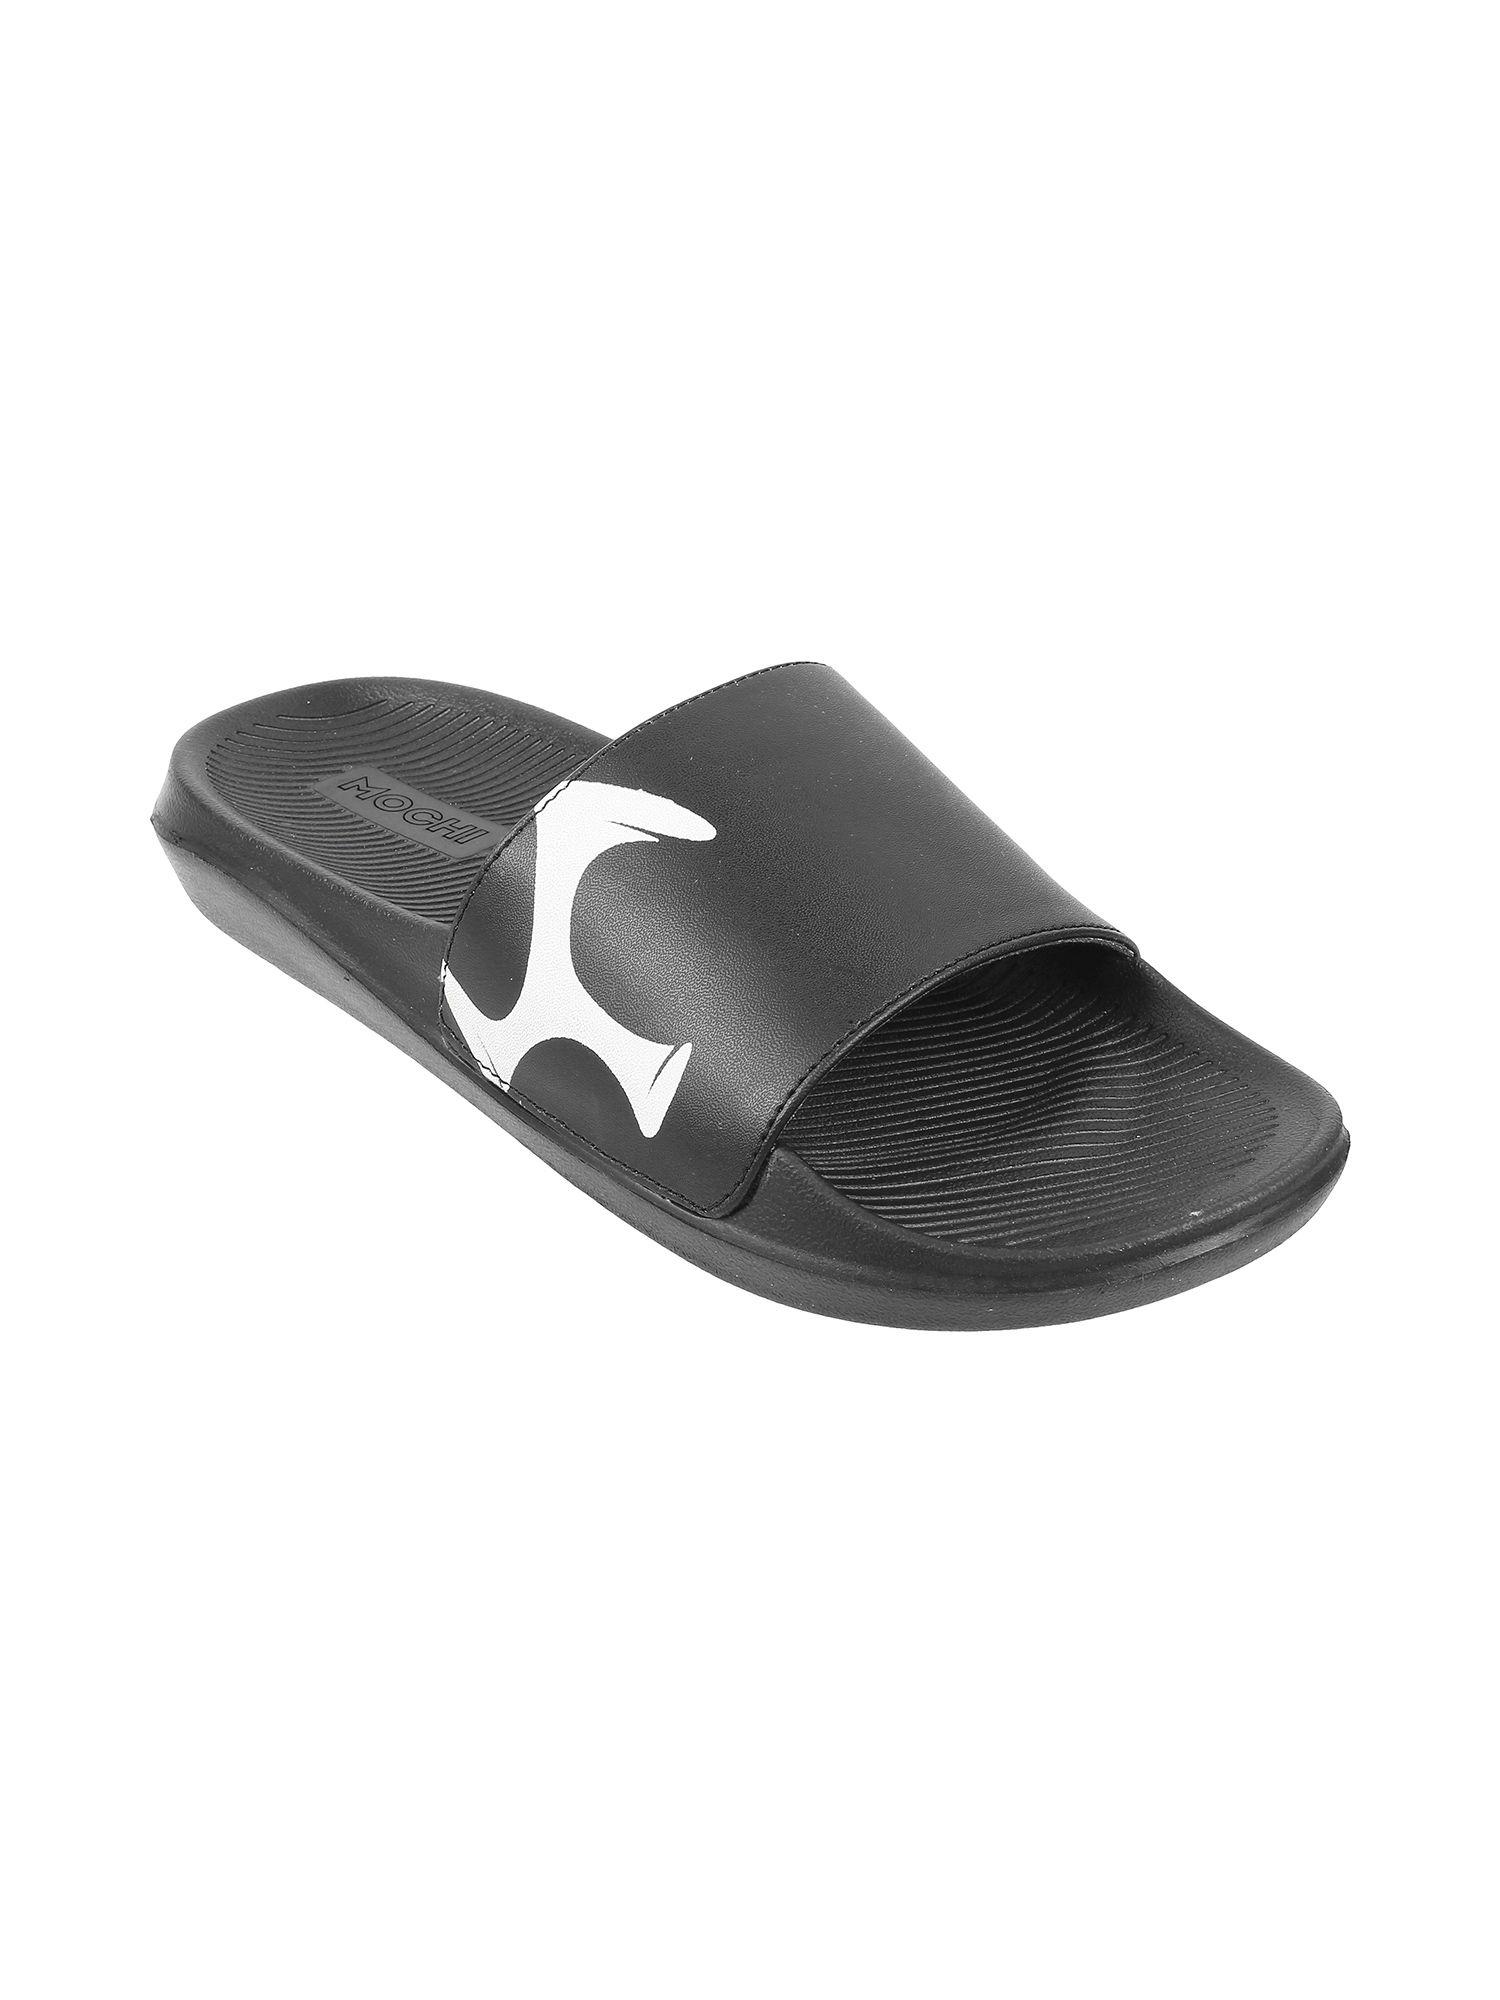 comfortable-mens-synthetic-black-sliders